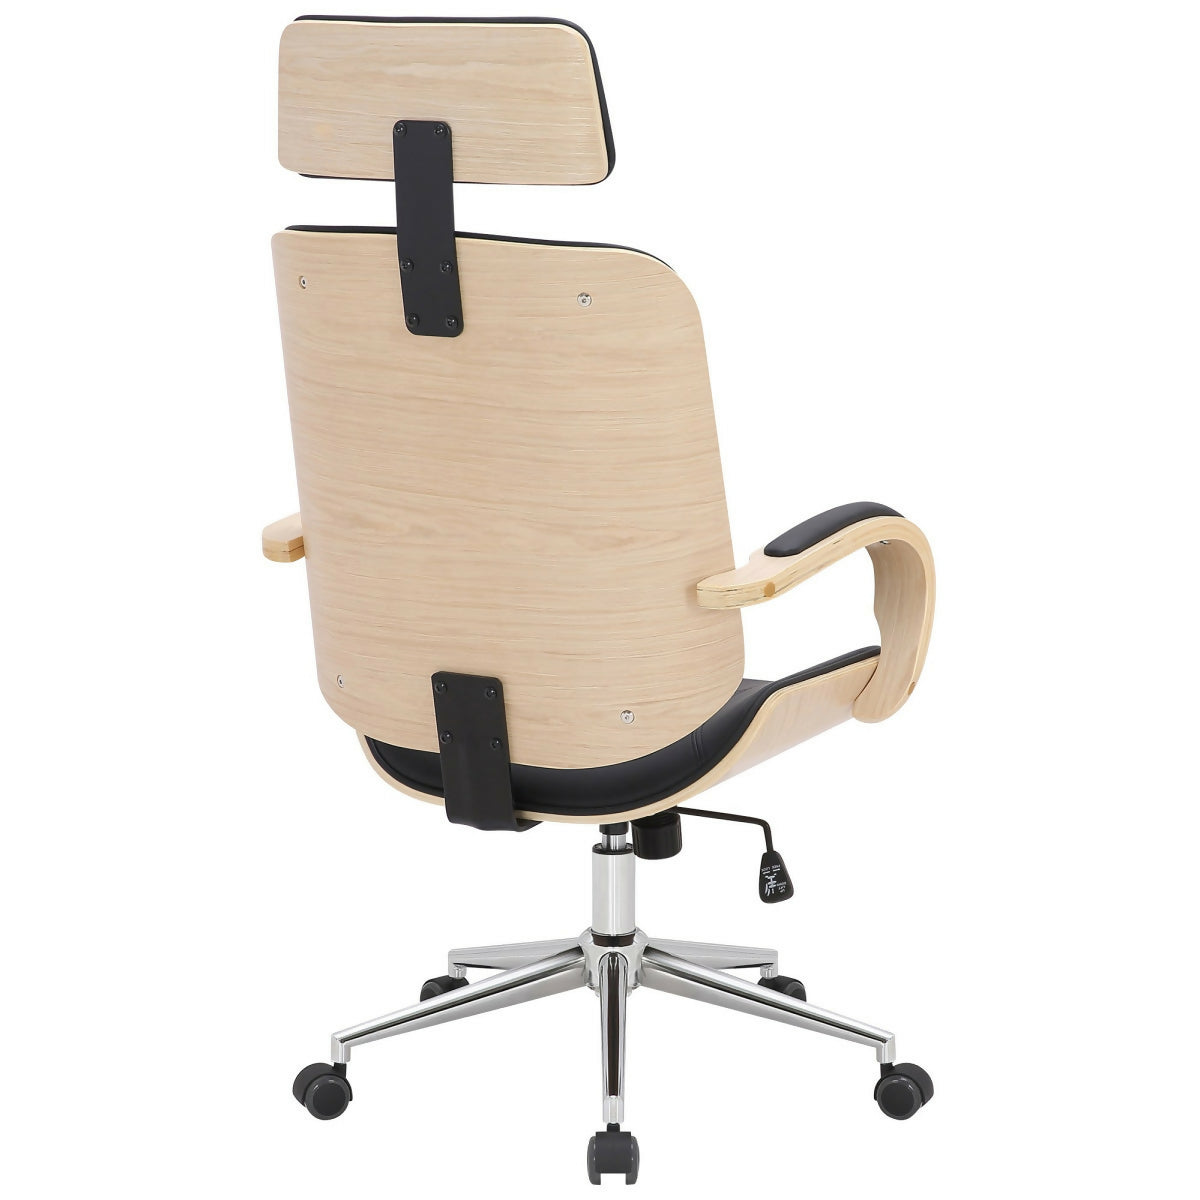 Dayton Office Chair, Black Leather &amp; Natural Wood